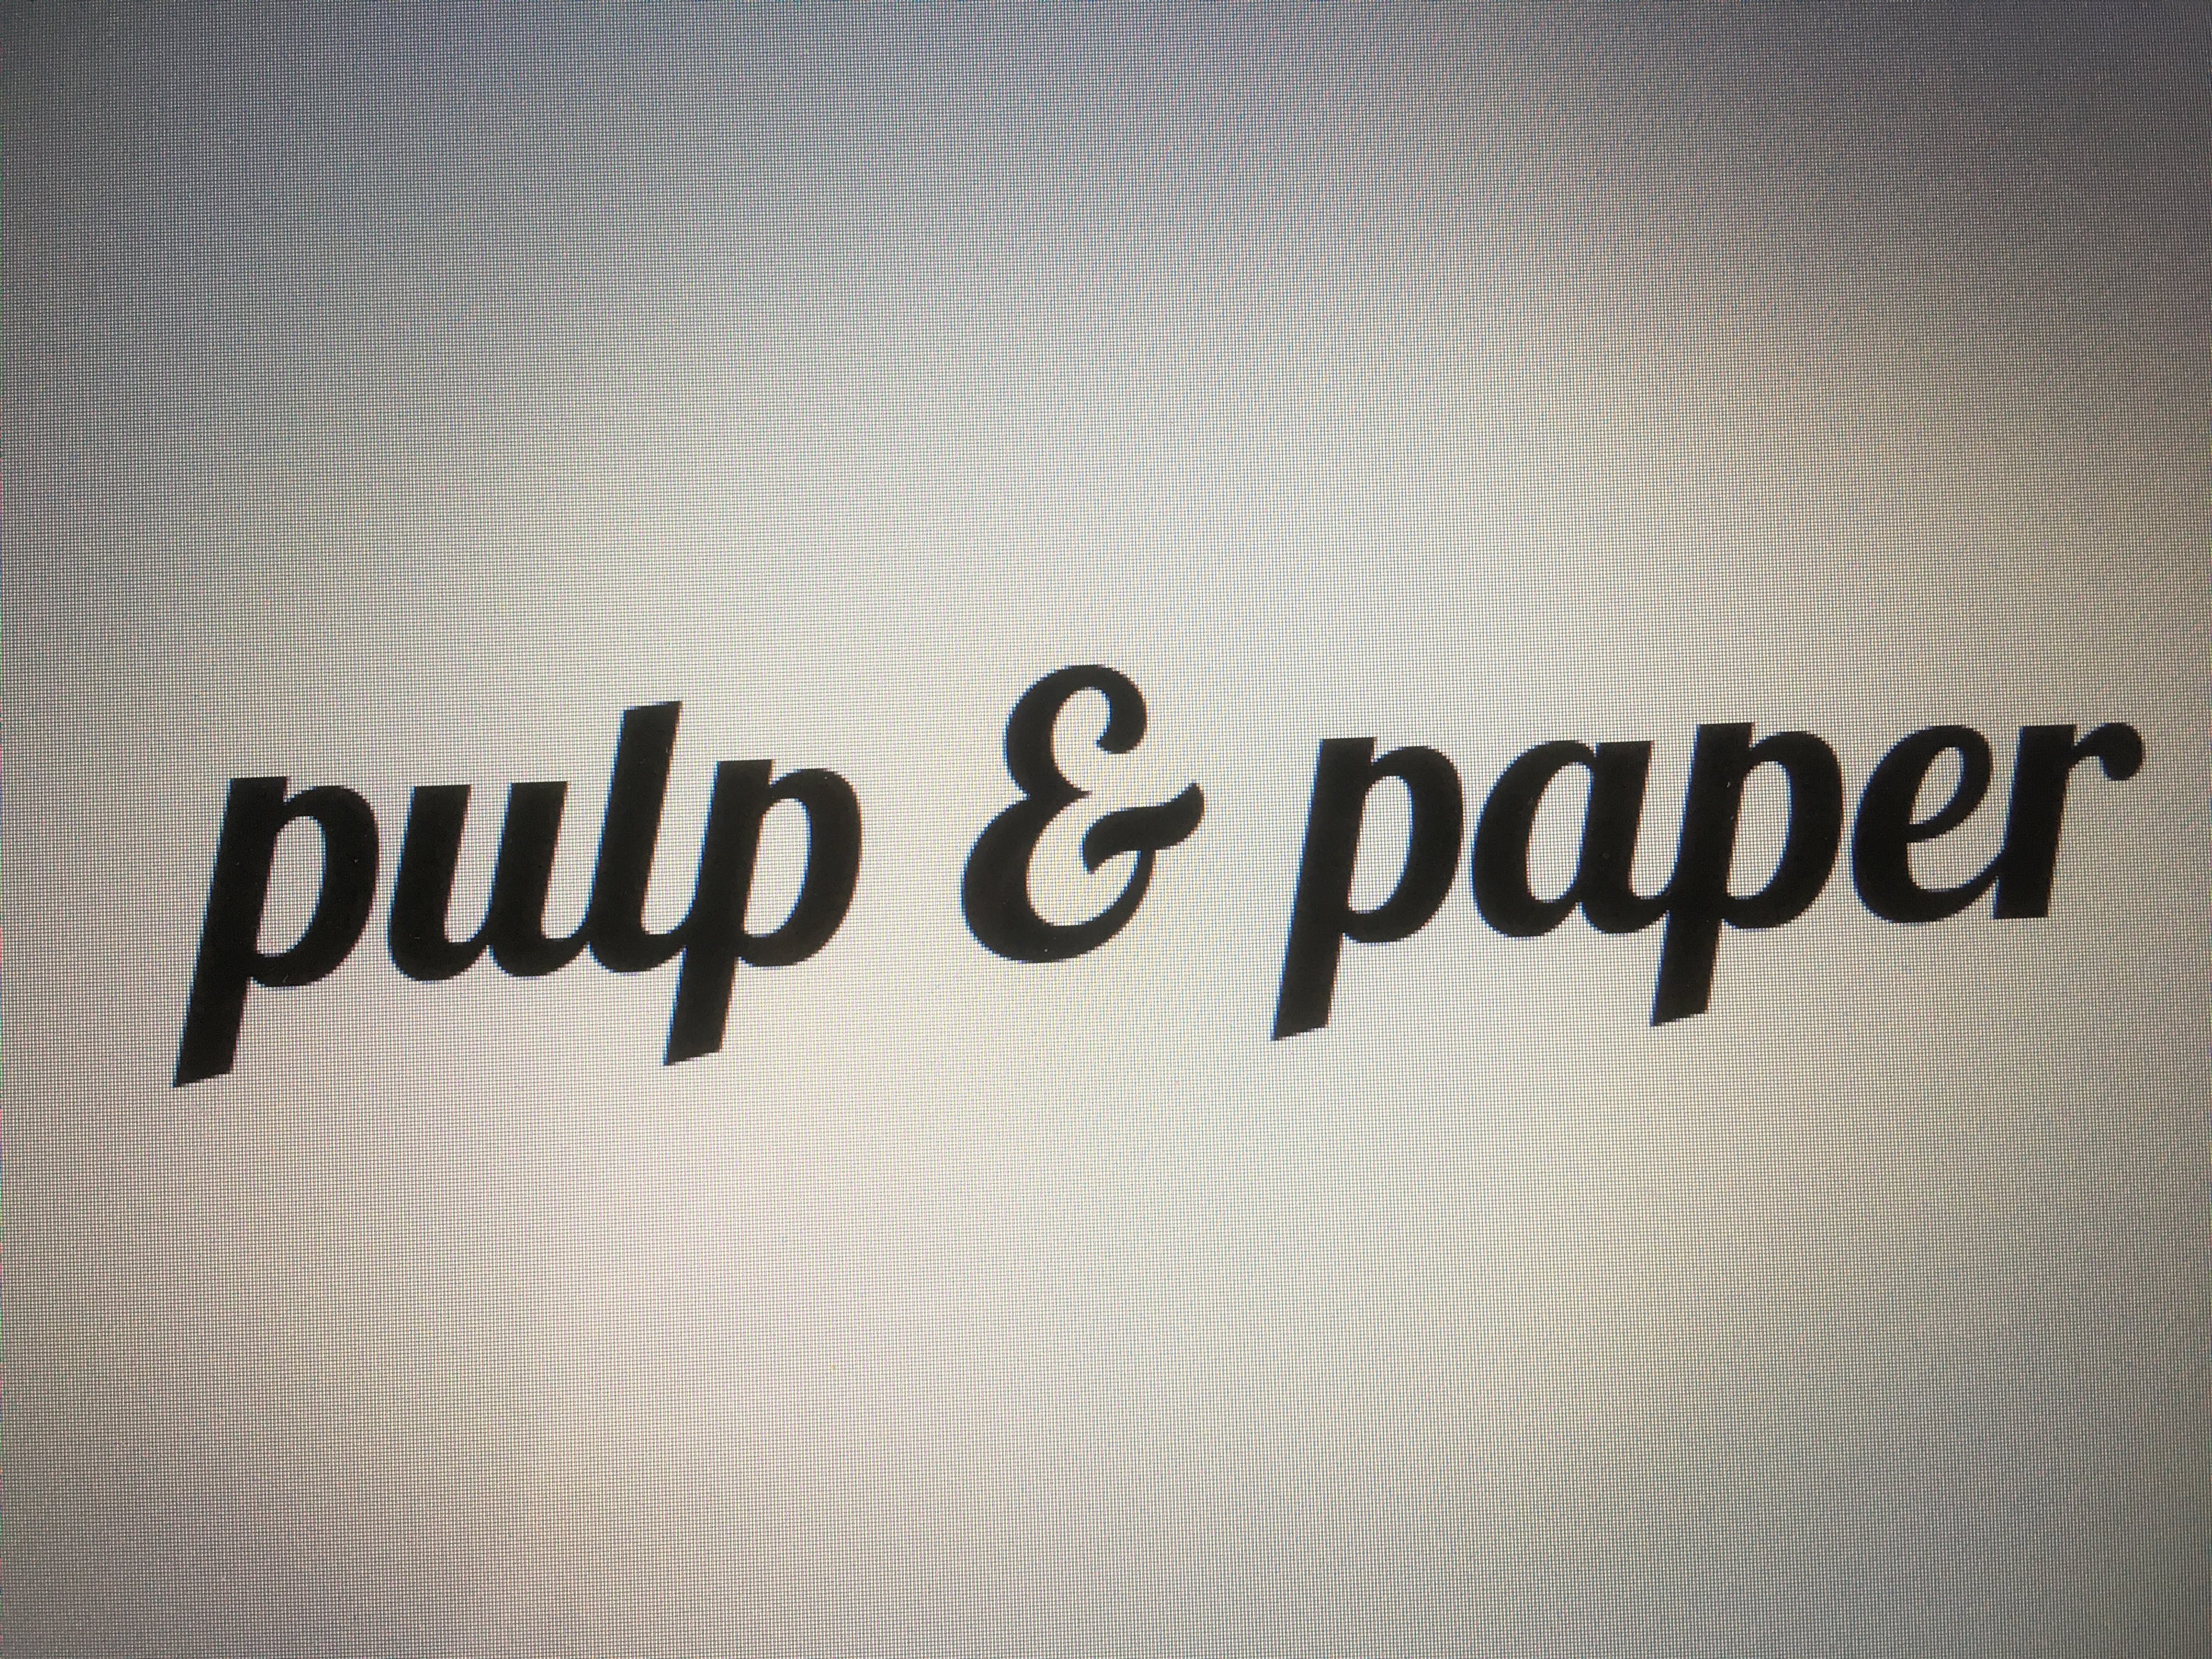 pulp and paper